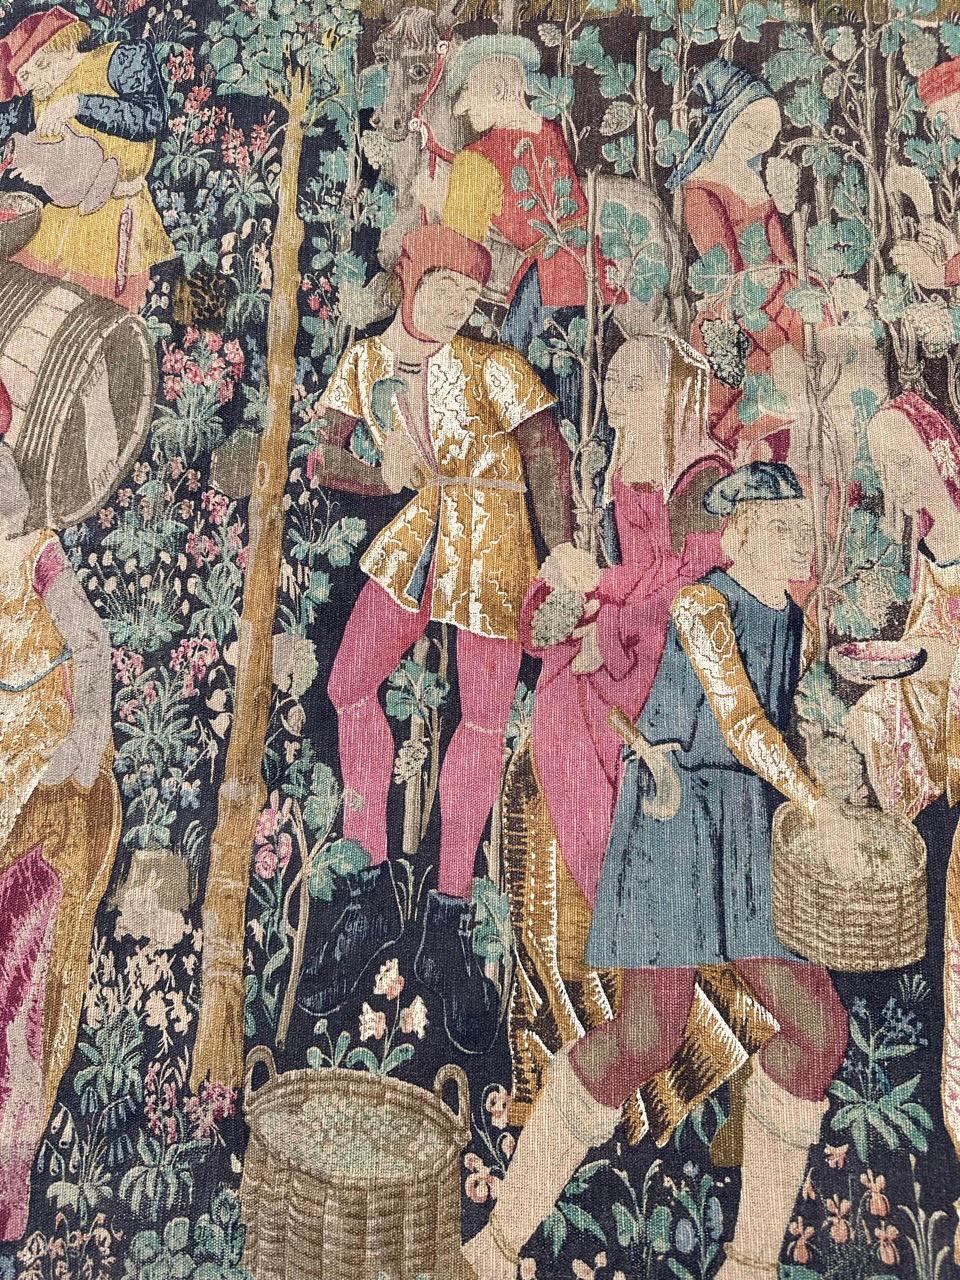 Discover the elegance of this mid-century French hand-printed tapestry featuring the exquisite design of the renowned medieval museum tapestry, 